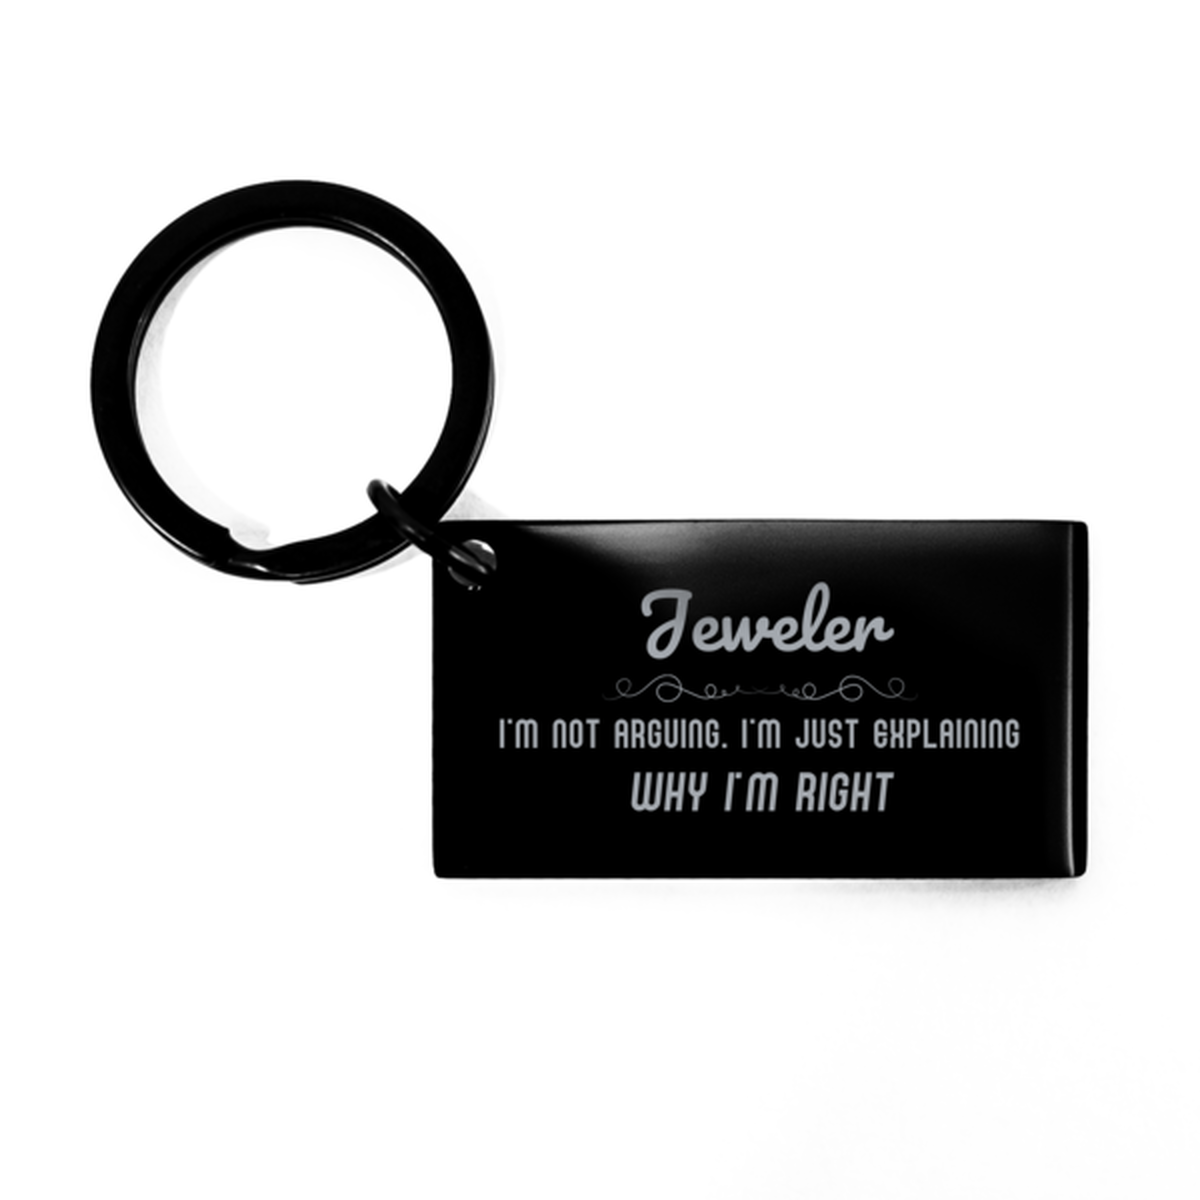 Jeweler I'm not Arguing. I'm Just Explaining Why I'm RIGHT Keychain, Funny Saying Quote Jeweler Gifts For Jeweler Graduation Birthday Christmas Gifts for Men Women Coworker